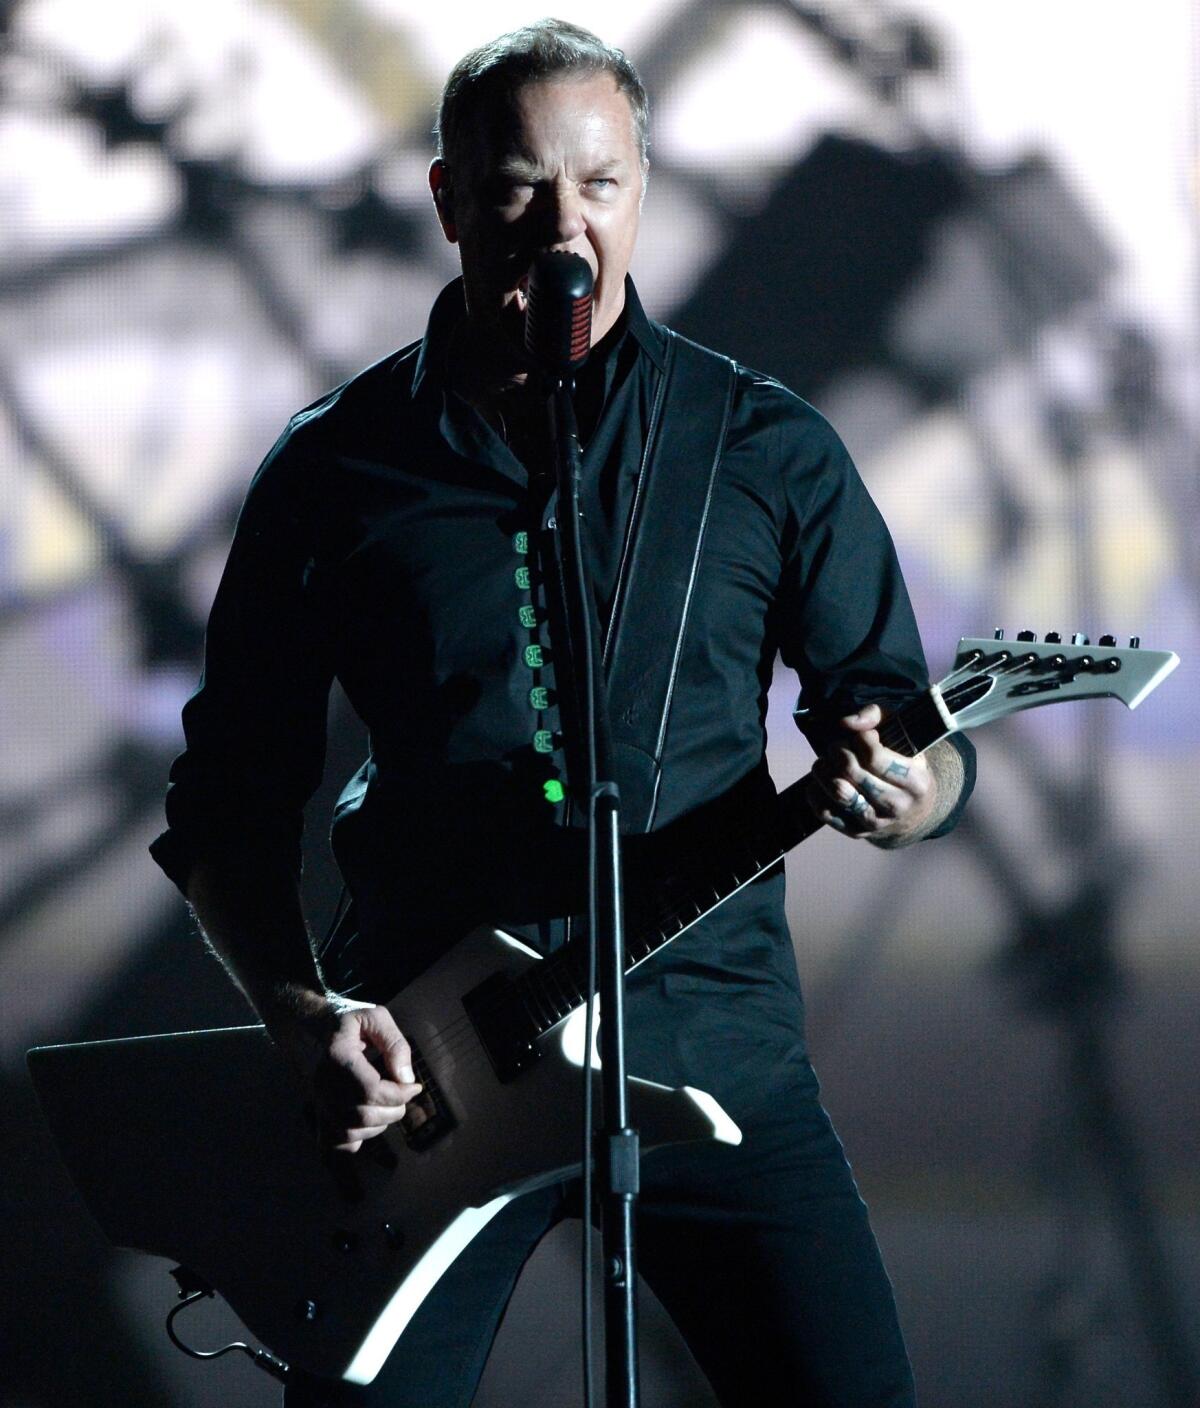 James Hetfield of Metallica performs onstage during the 56th Grammy Awards at Staples Center.